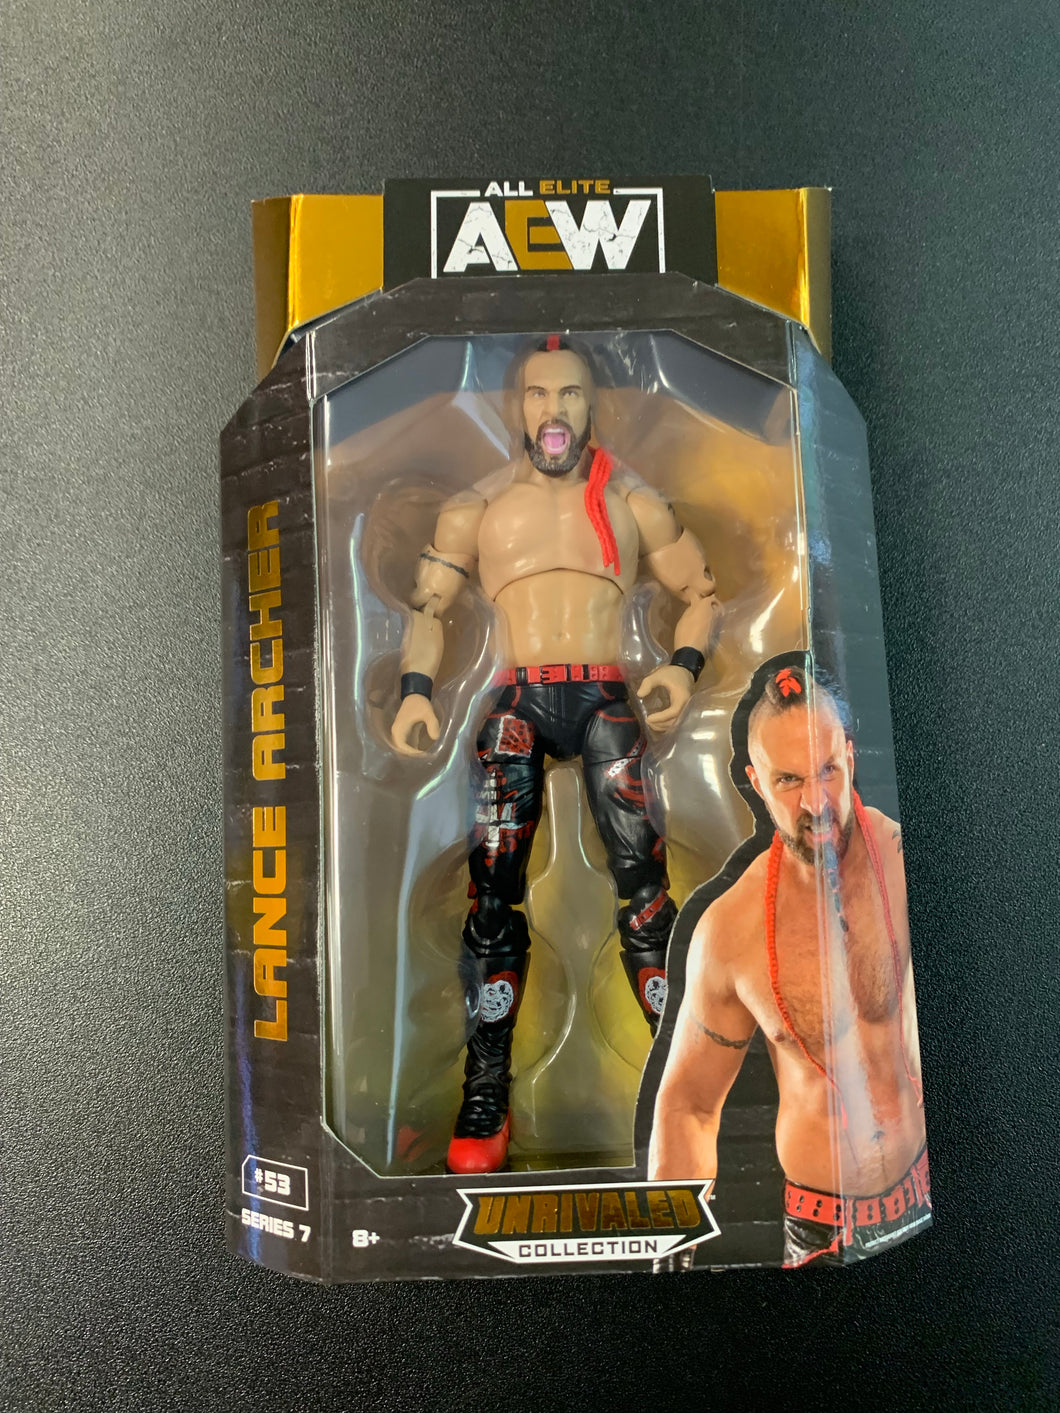 AEW LANCE ARCHER UNRIVALED COLLECTION #53 SERIES 7